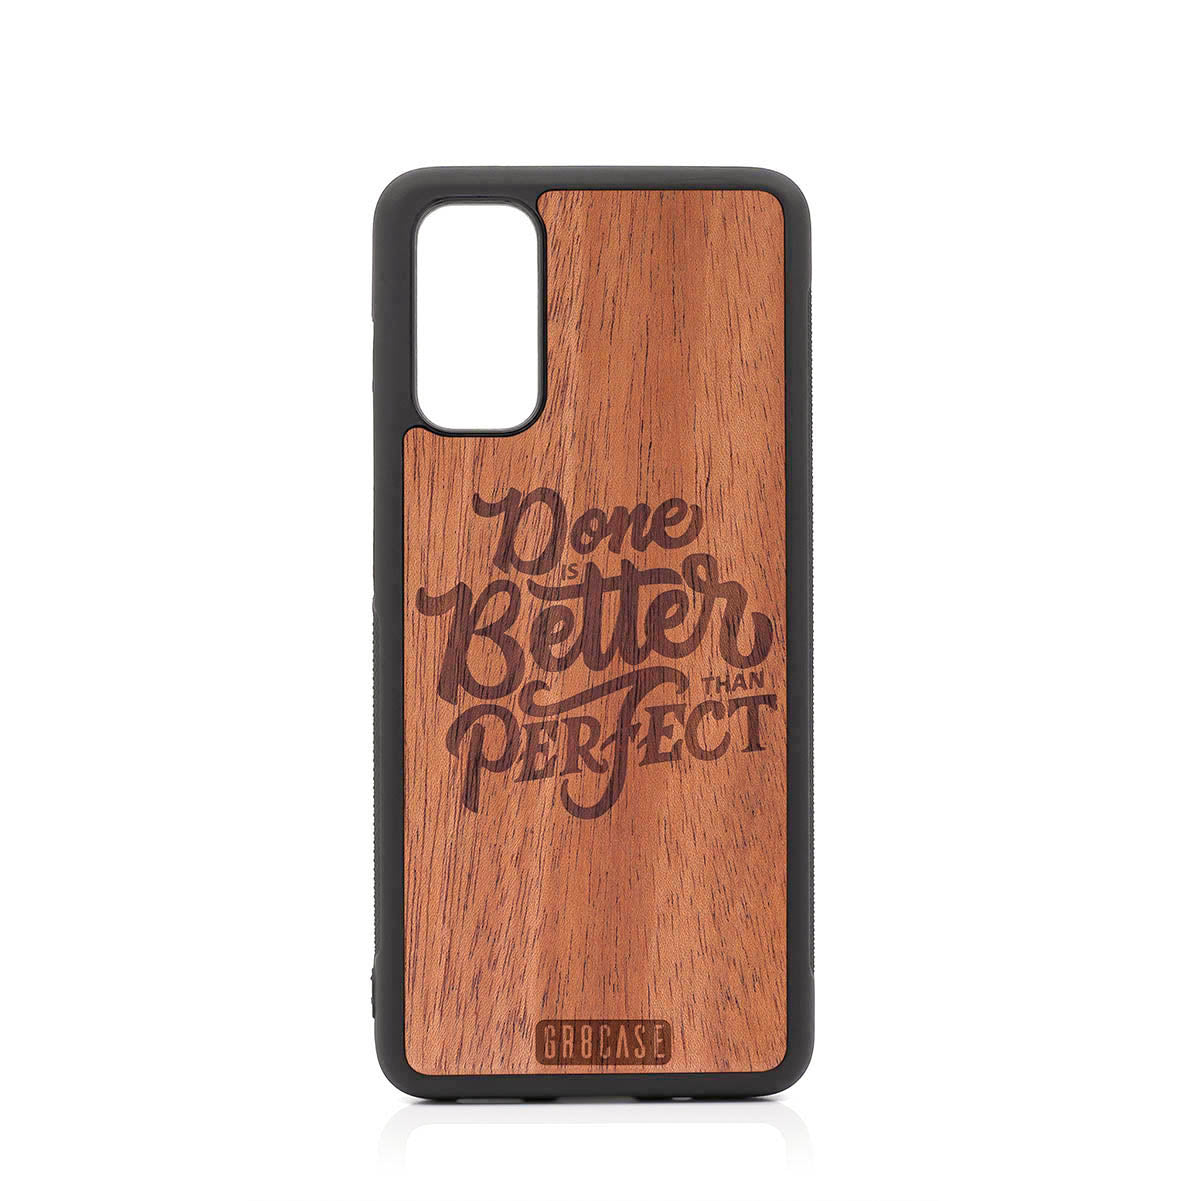 Done Is Better Than Perfect Design Wood Case For Samsung Galaxy S20 by GR8CASE